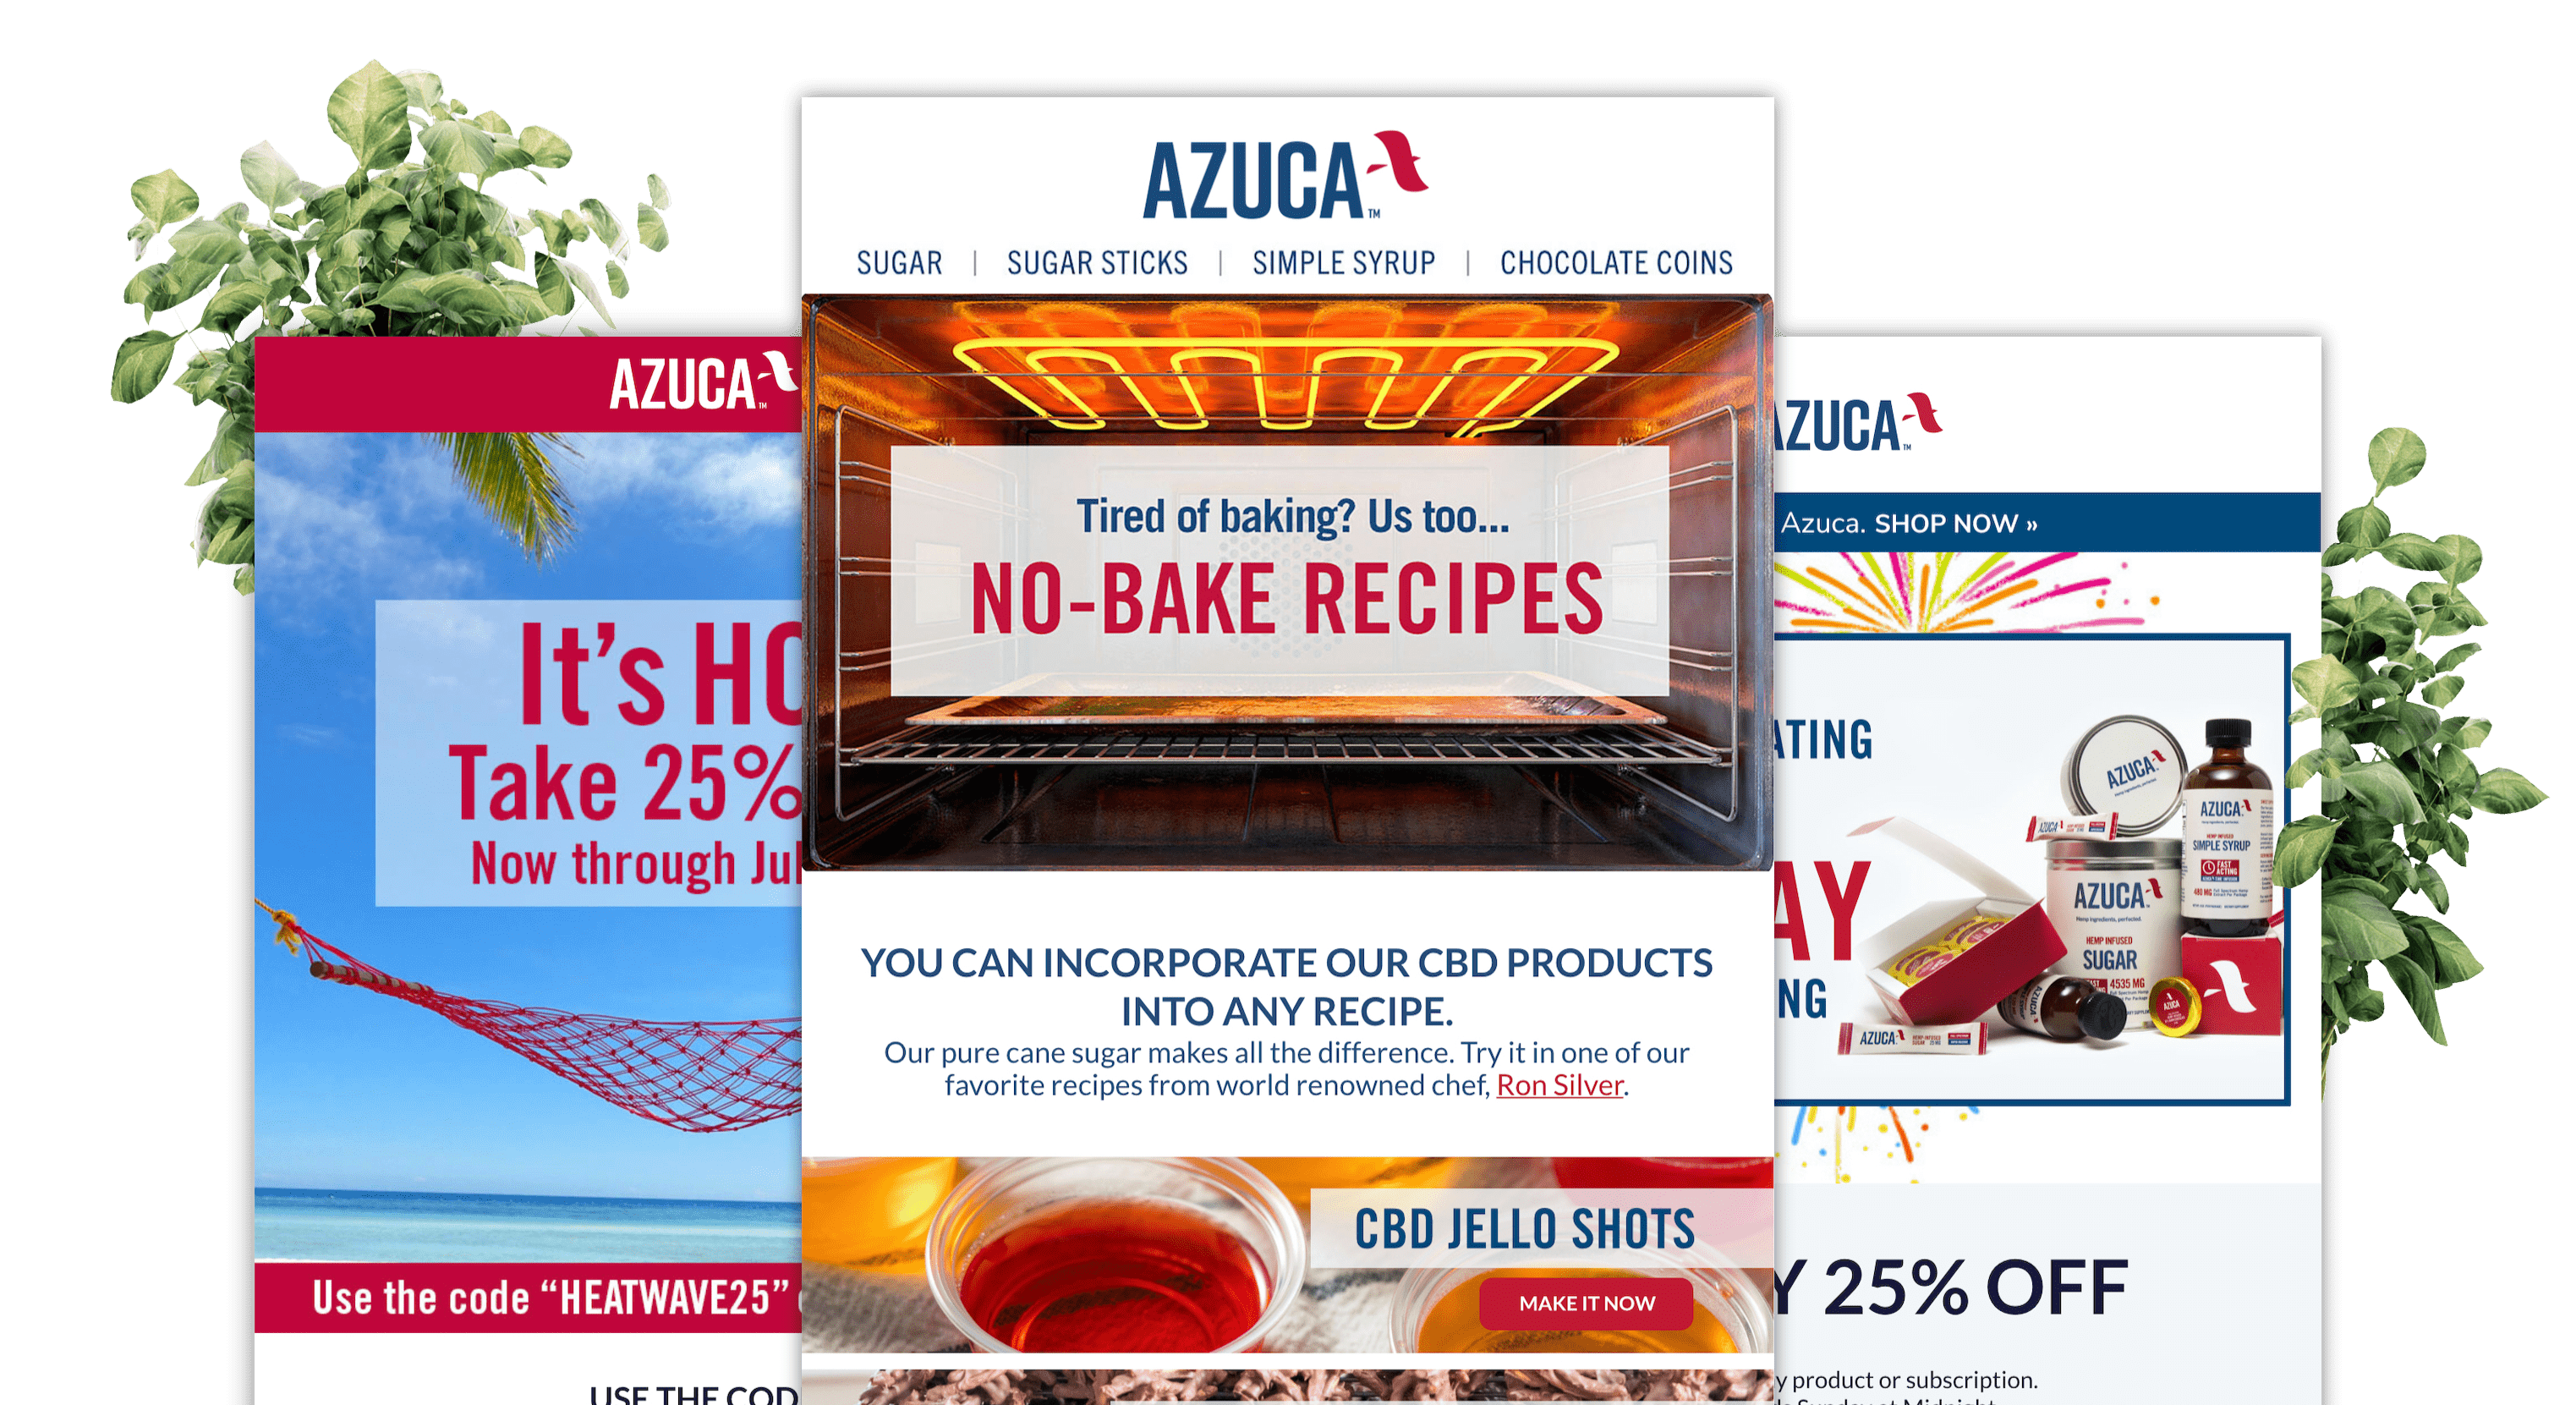 Azuca email campaigns